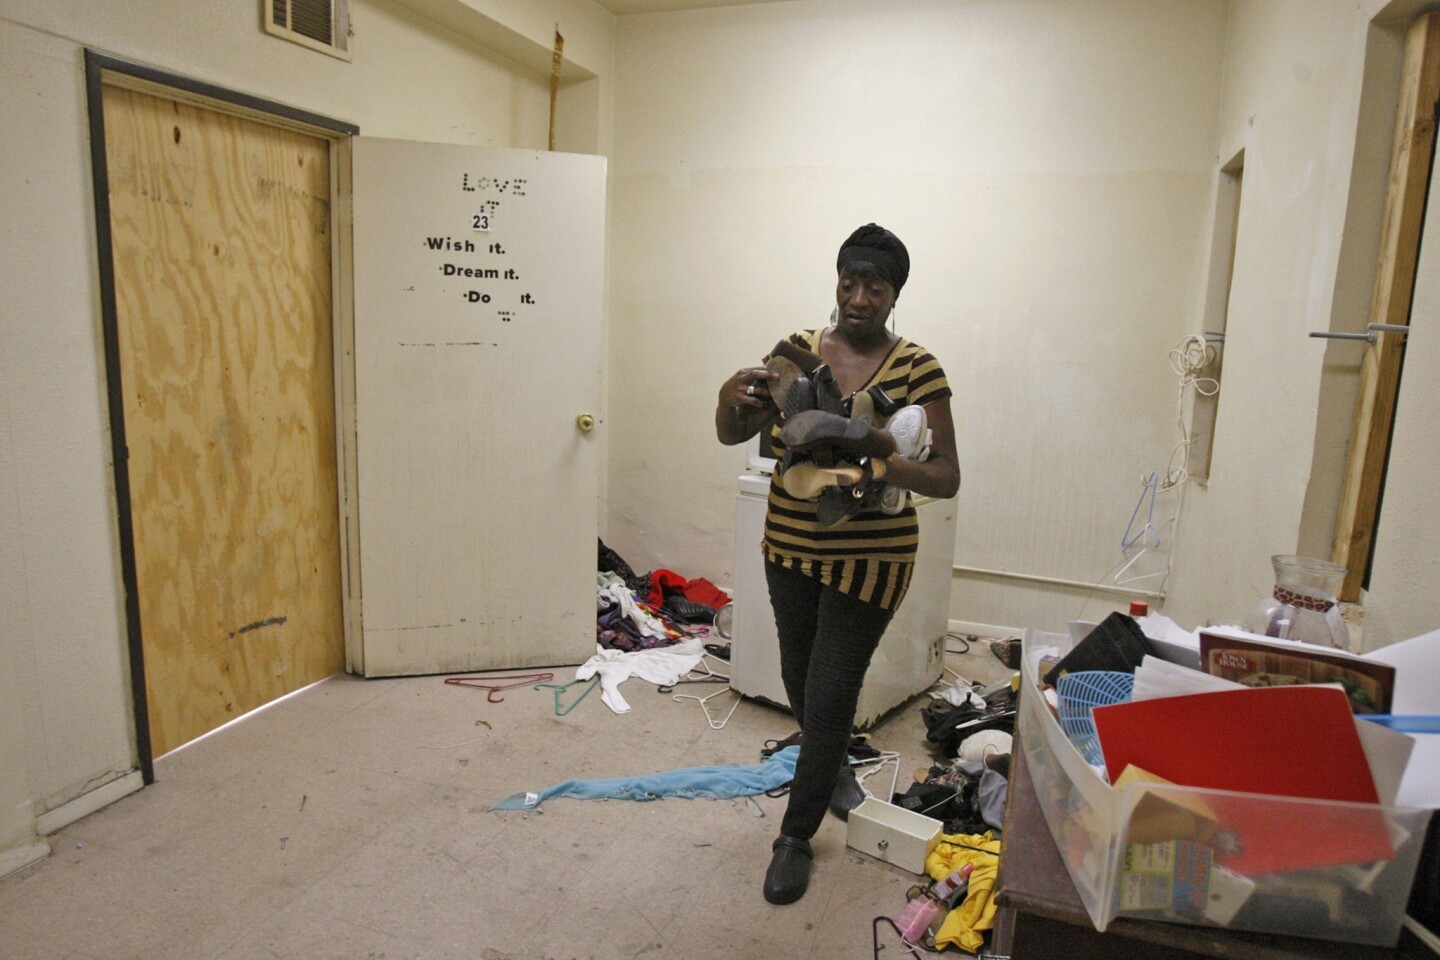 Patricia McDowell, 57, cleans up a storage area connected to her apartment in what was once office space that was converted into apartments at 5700 S. Hoover St. in Los Angeles. McDowell and her neighbors were told on short notice that they must vacate the building because of safety hazards.